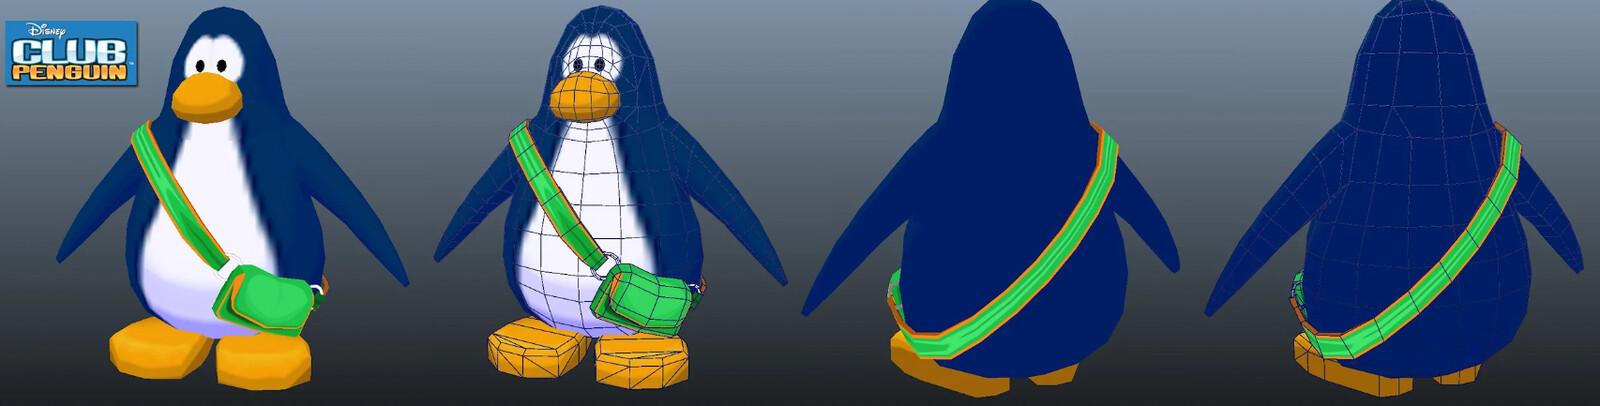 One of the accessories that I modeled and textured for Disney's Club Penguin. (Penguin model created by another artist)